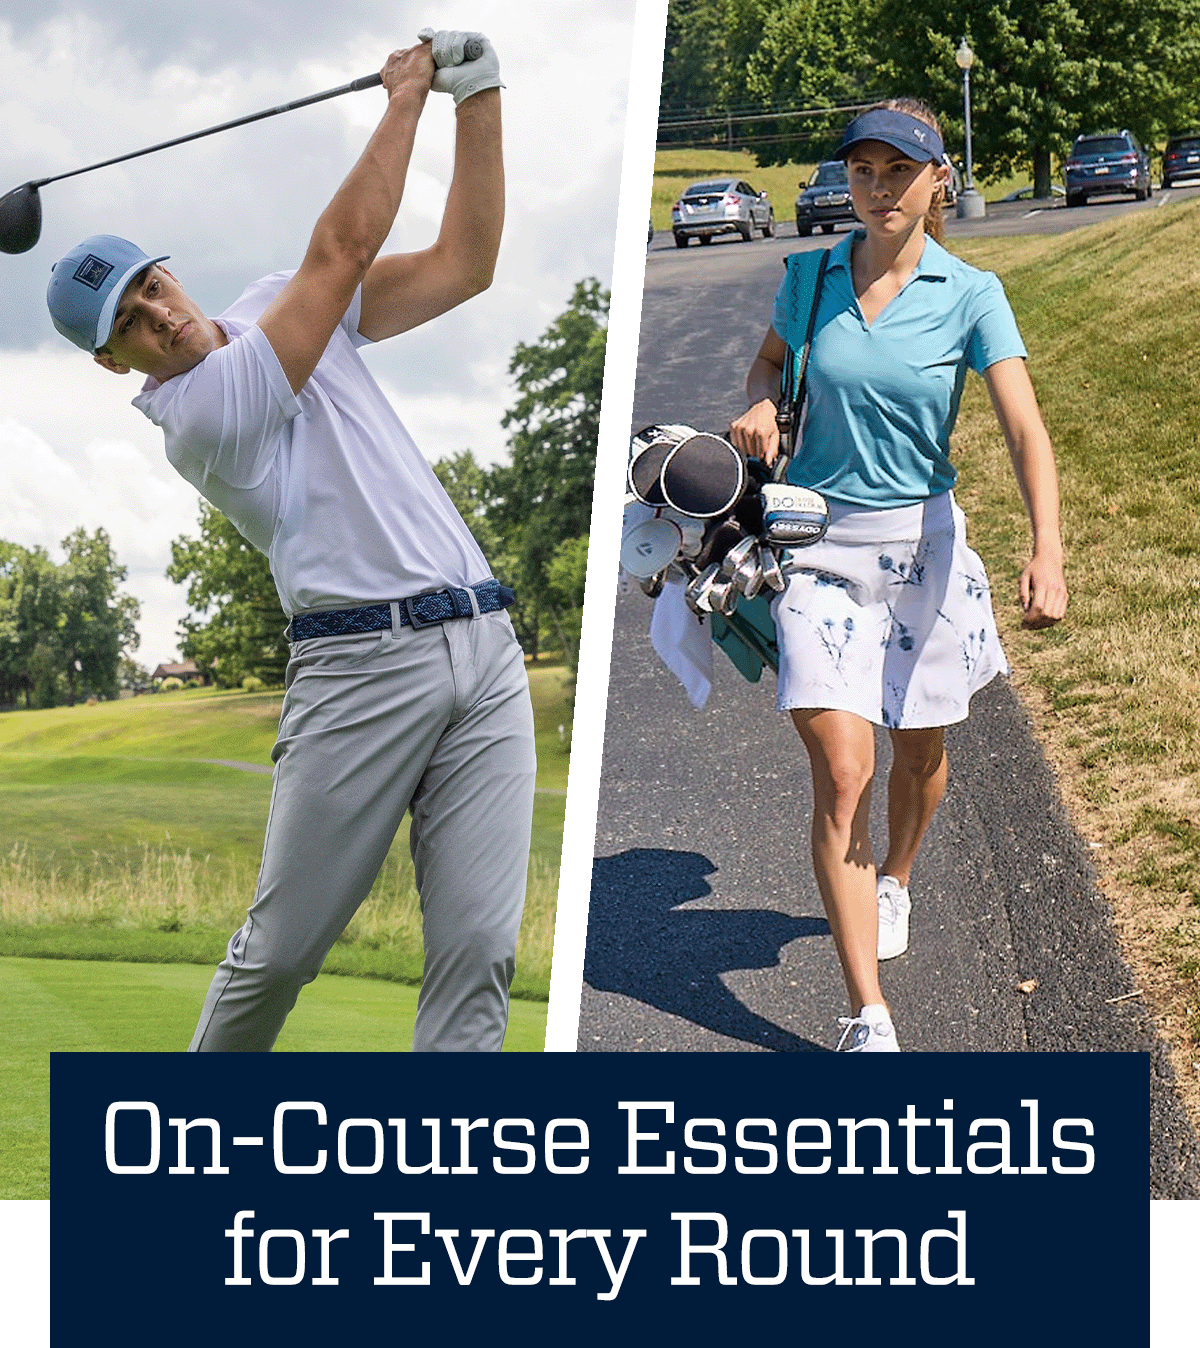 On-course essentials for every round.